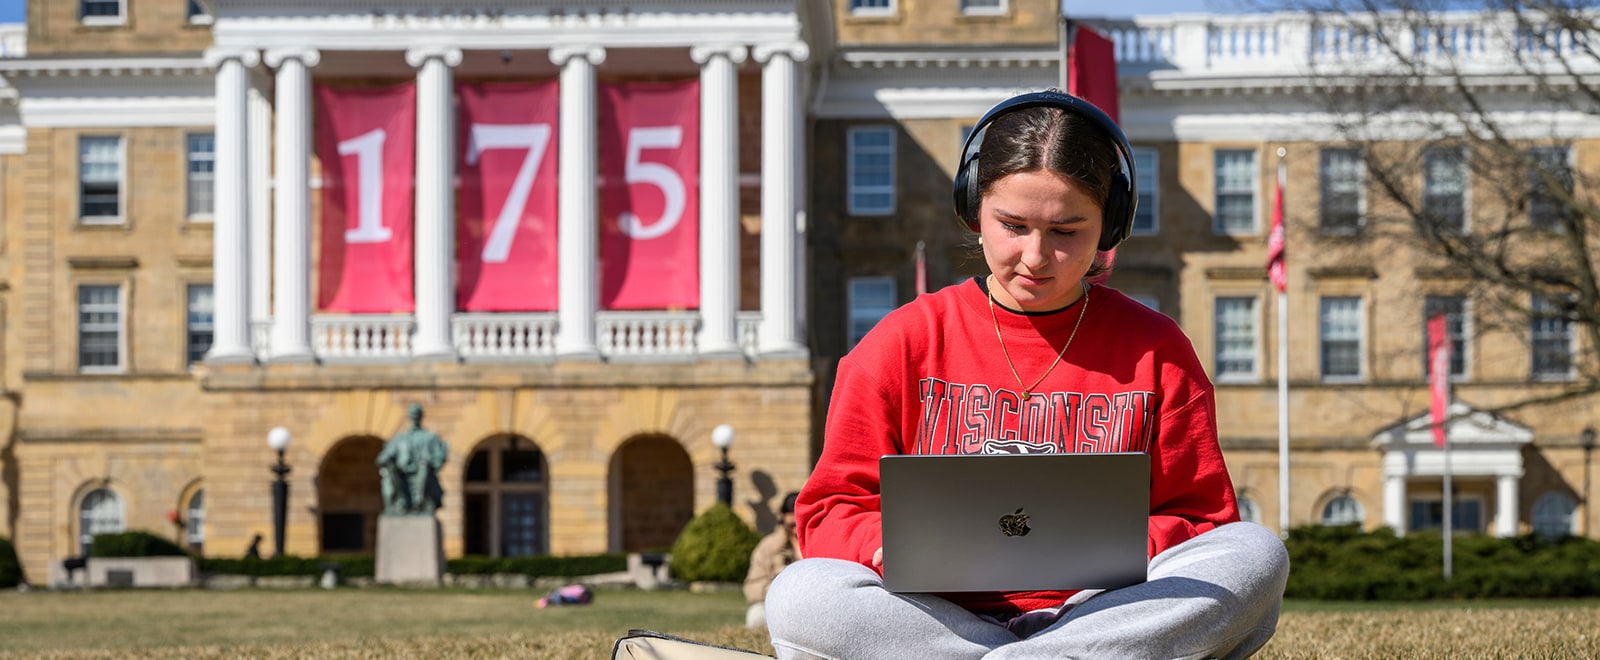 A student studies on Bascom Hill on an early spring day with Bascom Hall, adorned with 175 banners, behind her.